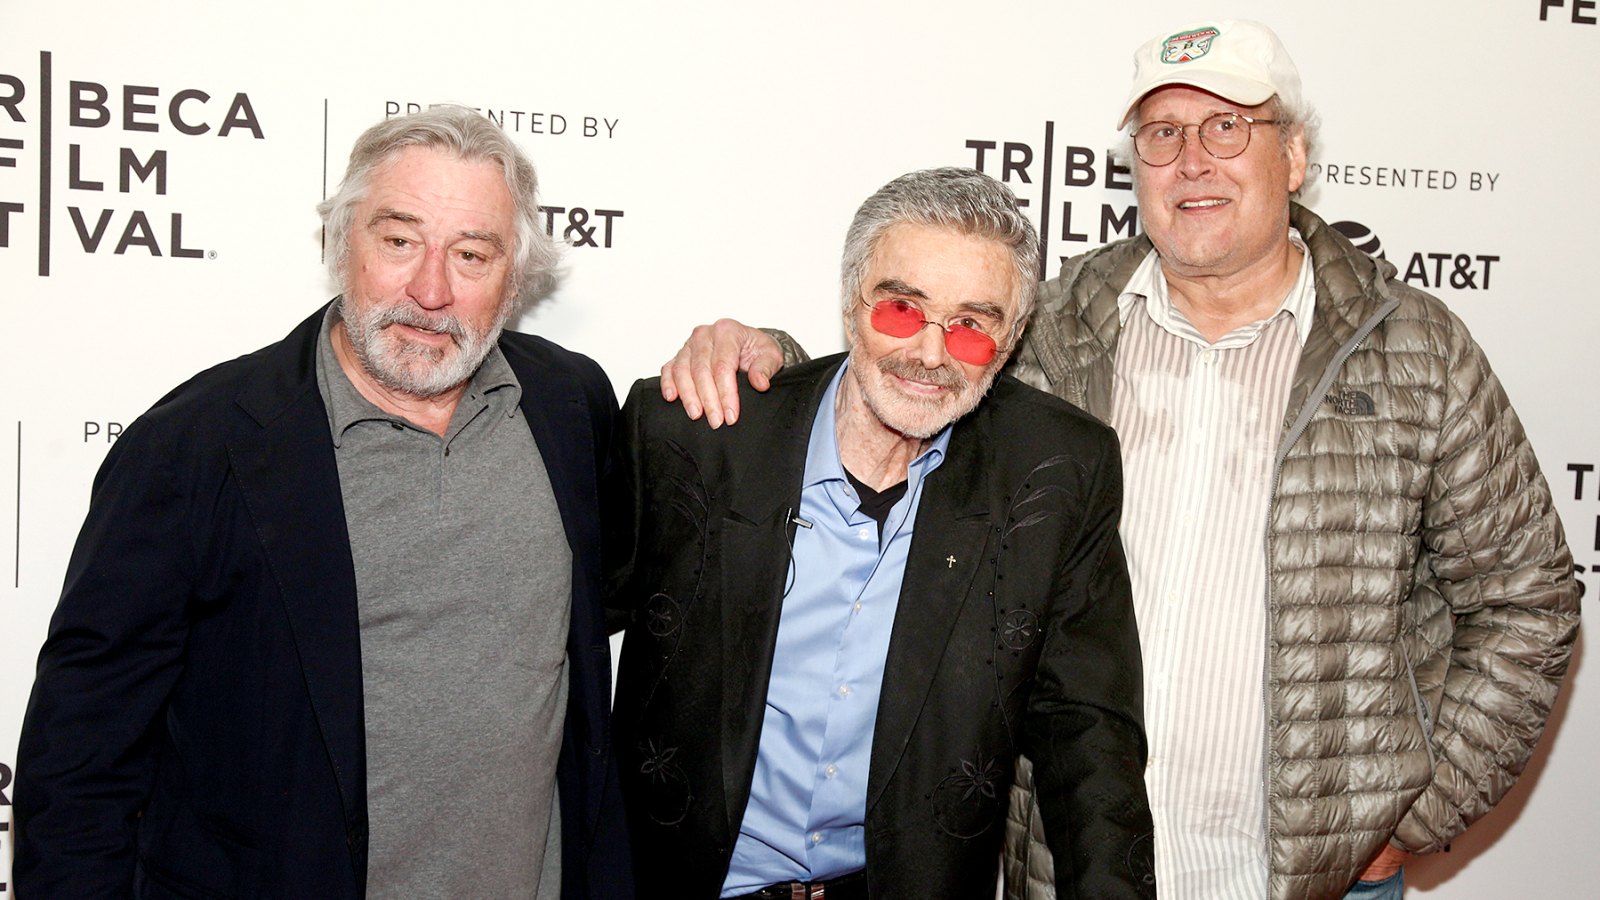 Robert De Niro, from left, Burt Reynolds and Chevy Chase attend the screening of "Dog Years", during the 2017 Tribeca Film Festival, at Cinepolis Chelsea on Saturday, April 22, 2017, in New York.